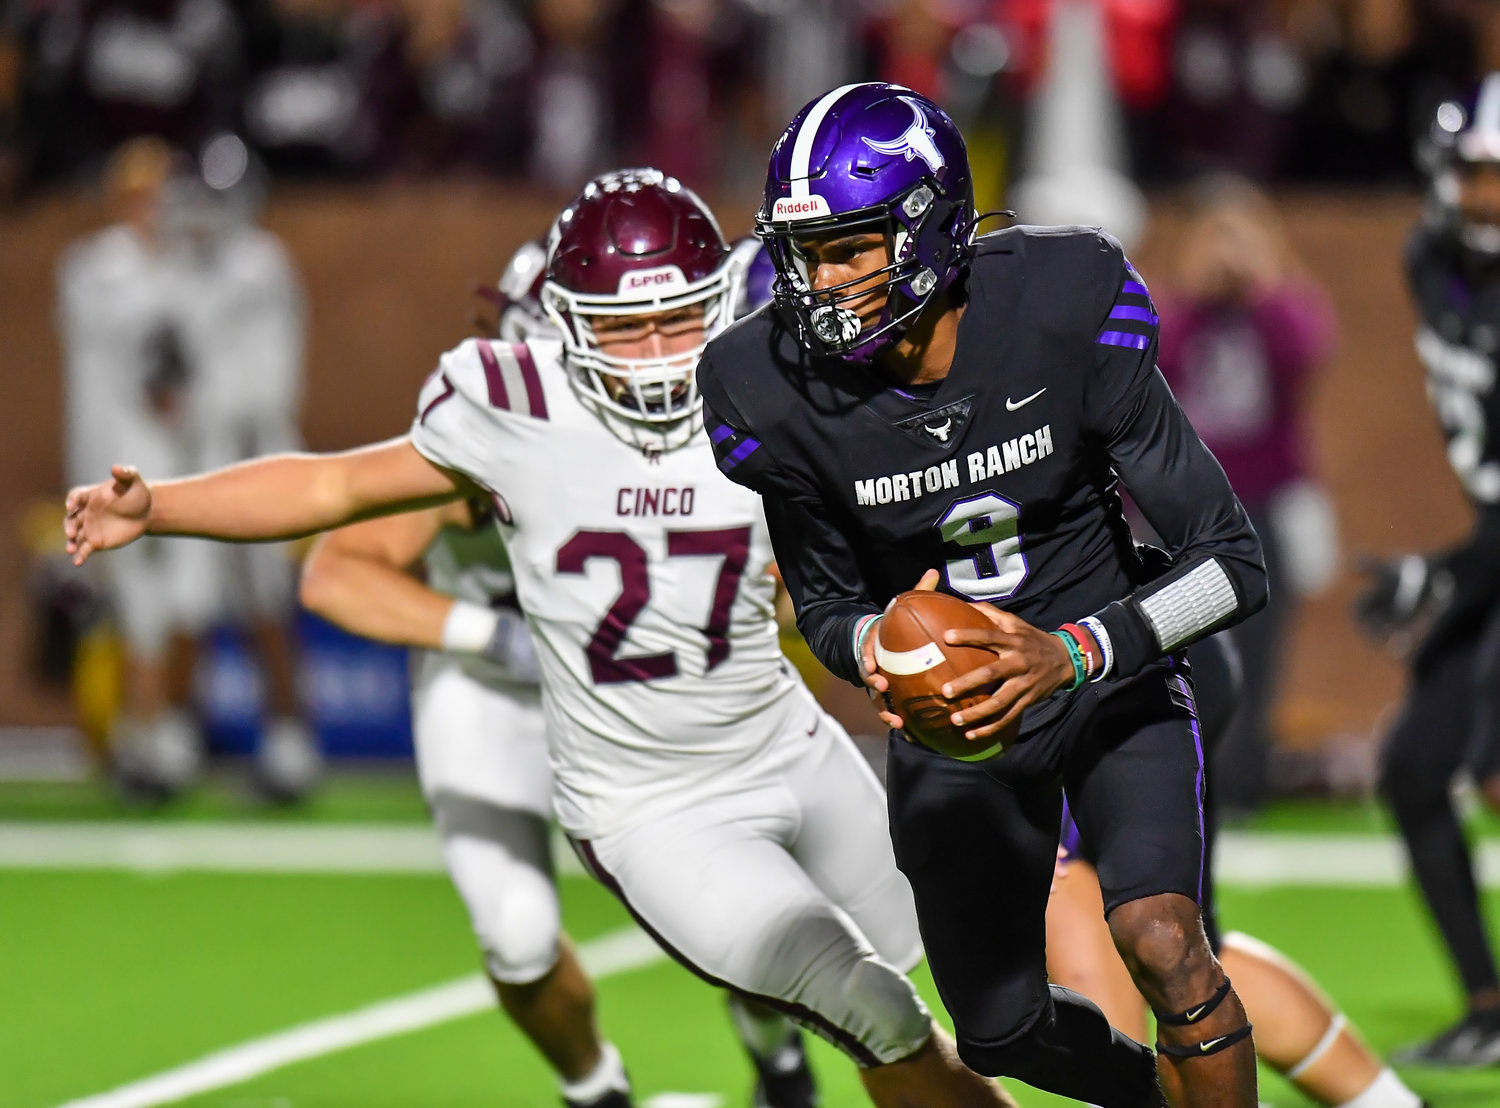 Katy, Tx. Oct 29, 2021: Morton Ranch's QB Joshua Johnson #9 rushes to the outside during a conference game between Cinco Ranch and Morton Ranch at Rhodes Stadium in Katy. (Photo by Mark Goodman / Katy Times)